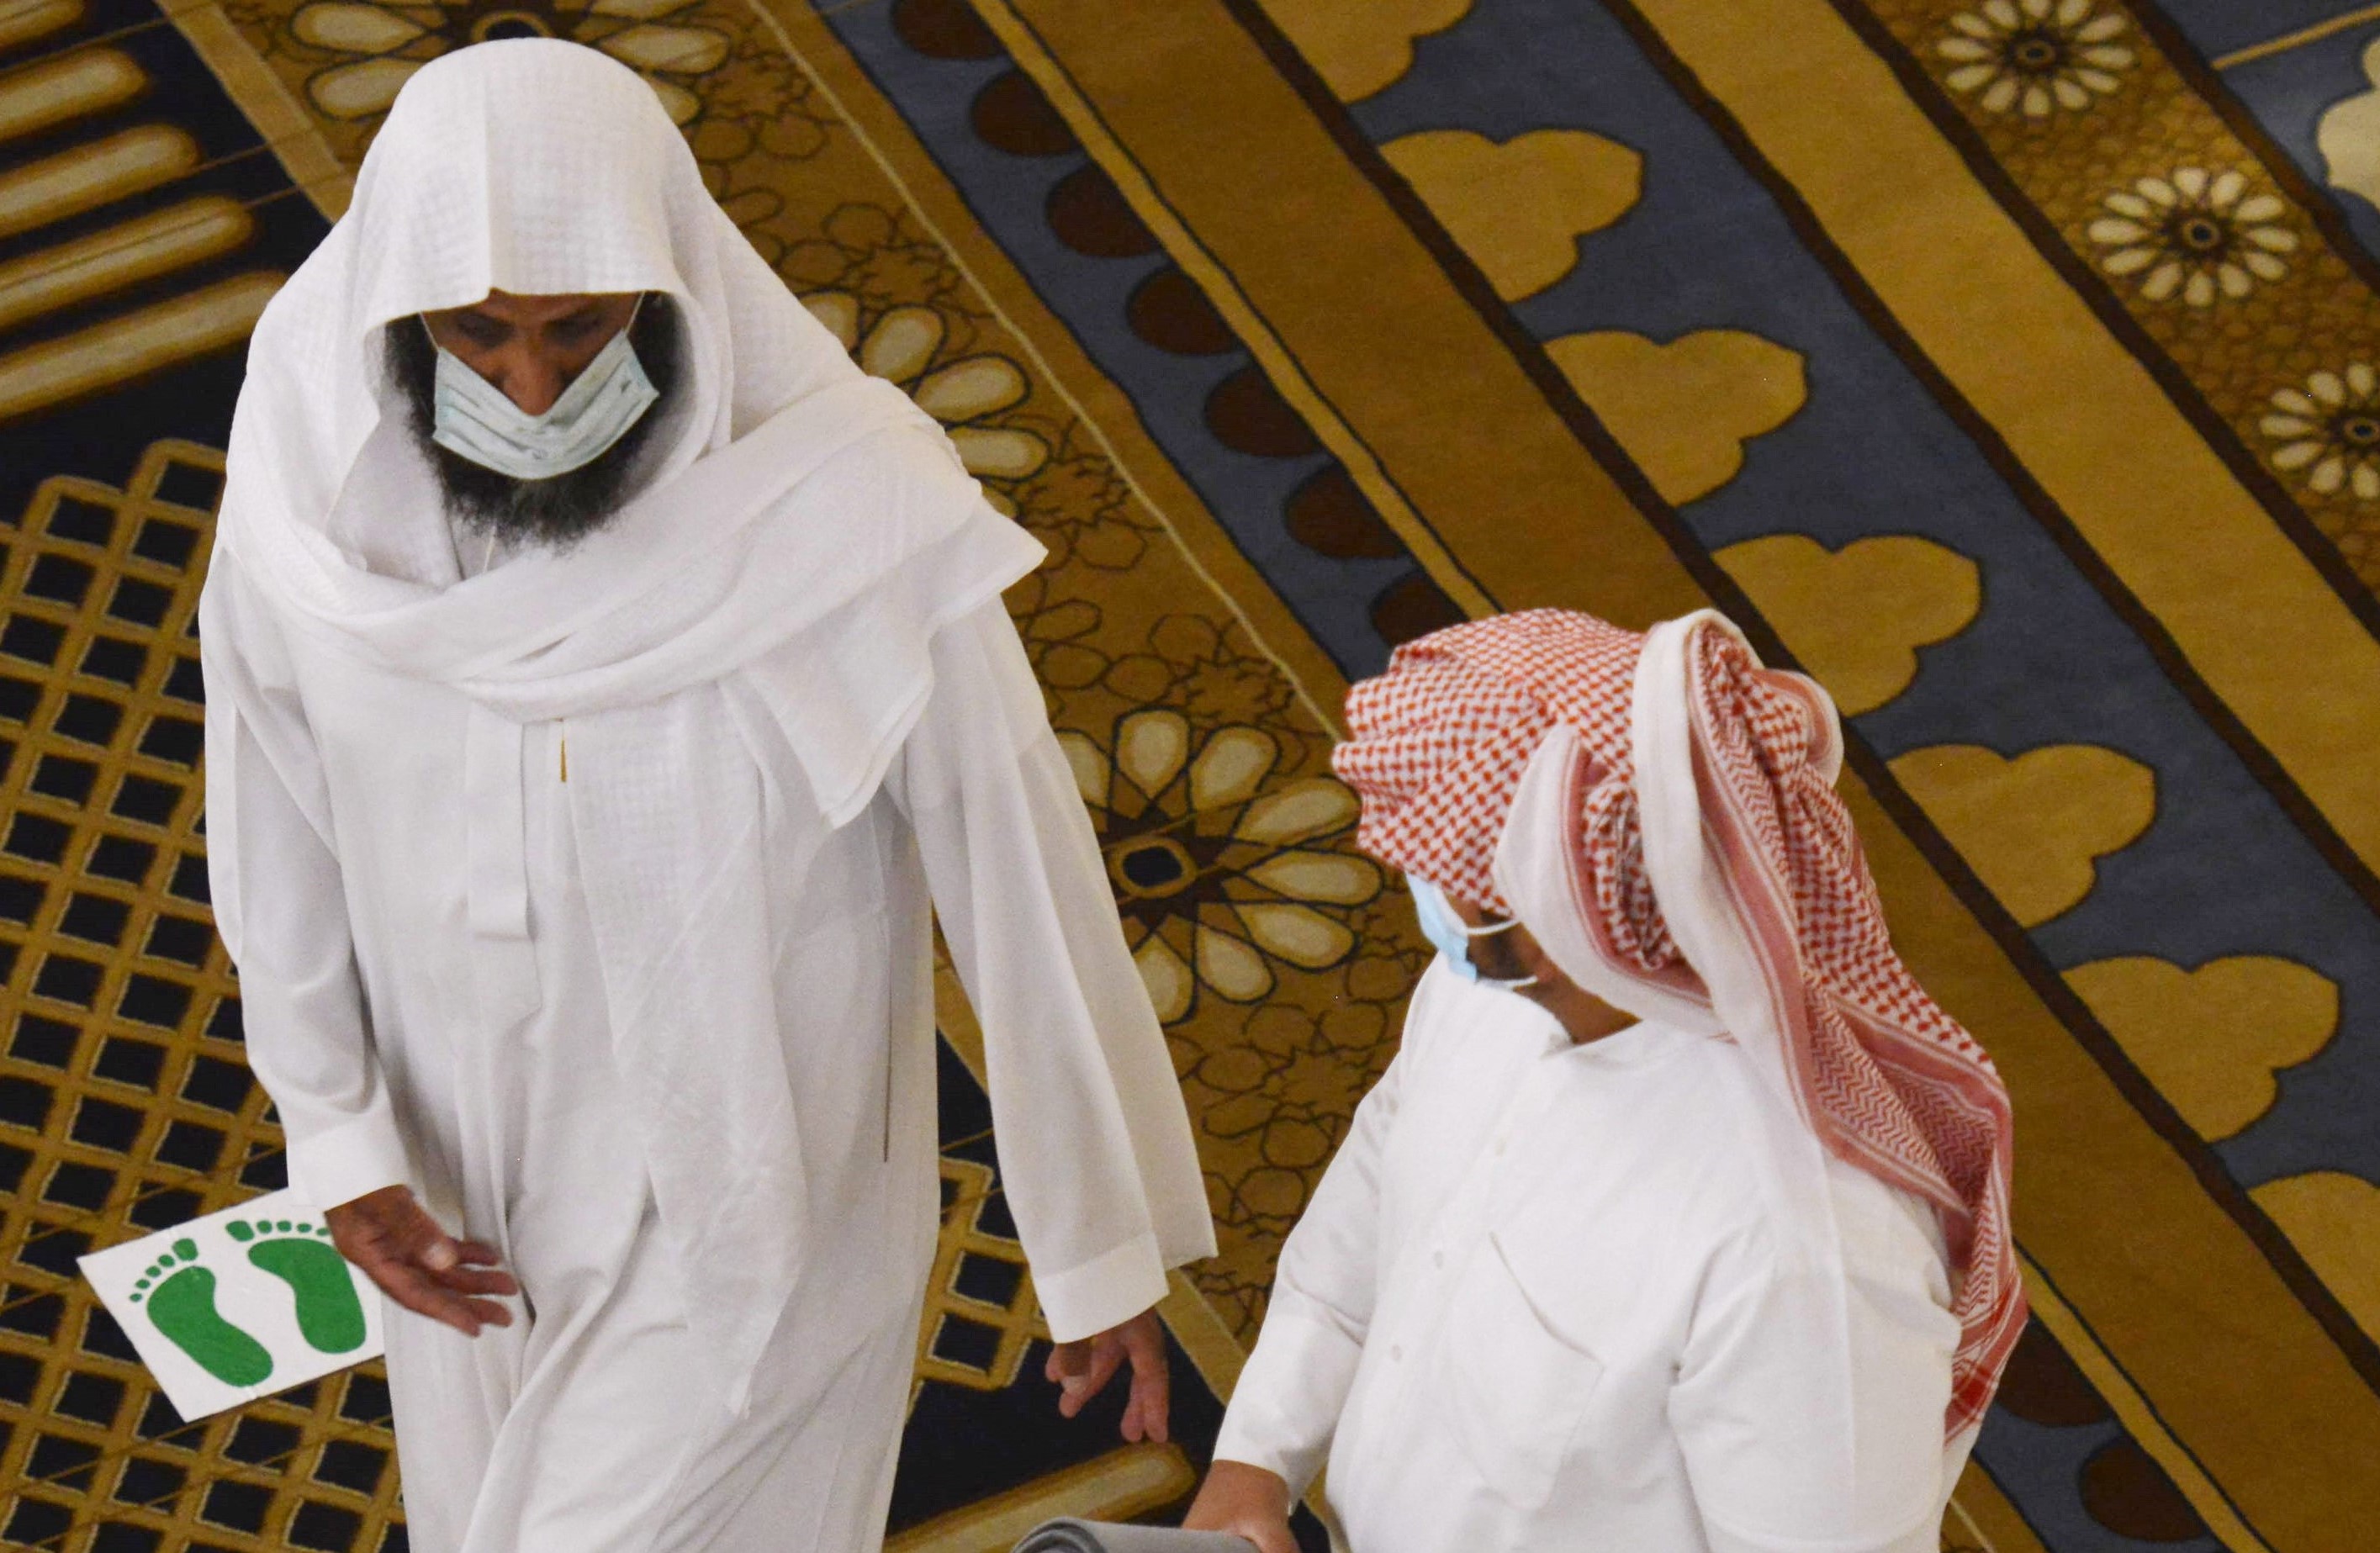 Saudi worshippers wearing face masks to prevent the spread of Covid-19 walk at the al-Rajhi mosque in the Riyadh, on August 31, 2020.